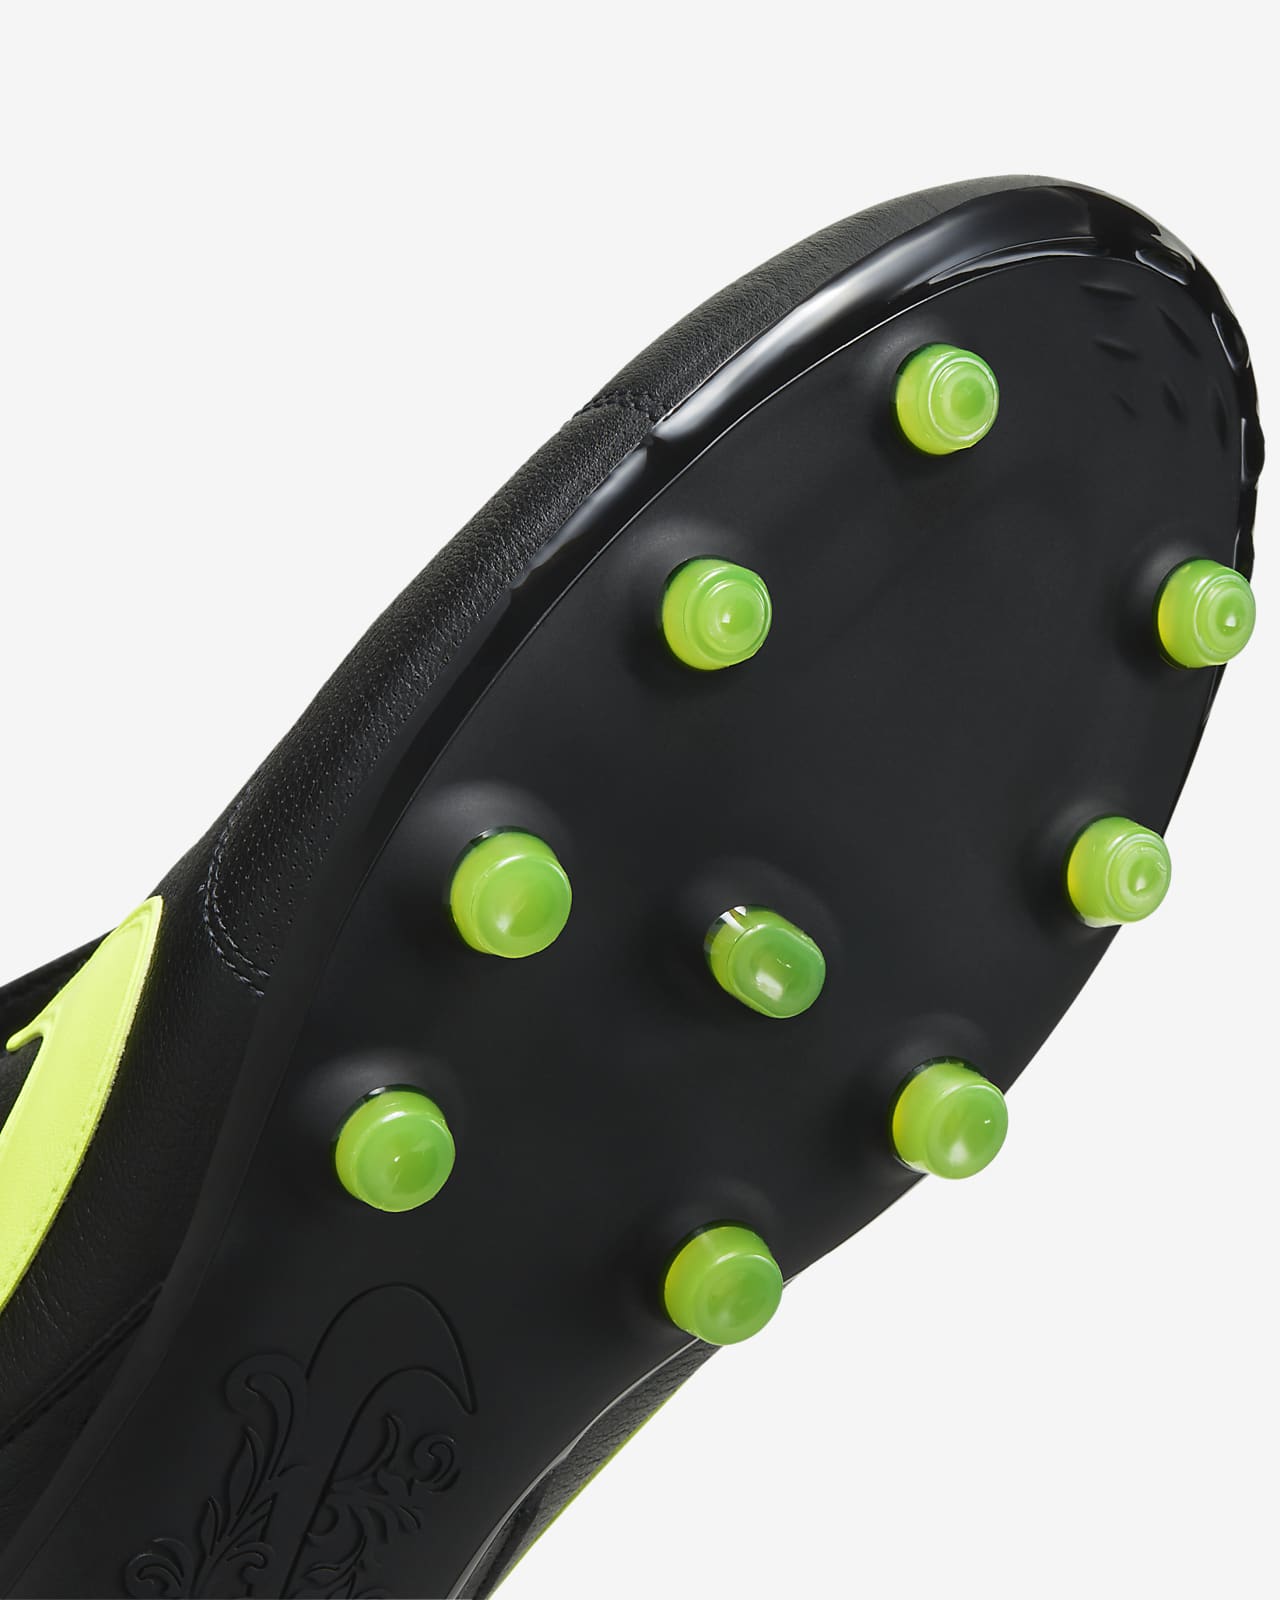 NikePremier 3 FG Low-Top Football Boot